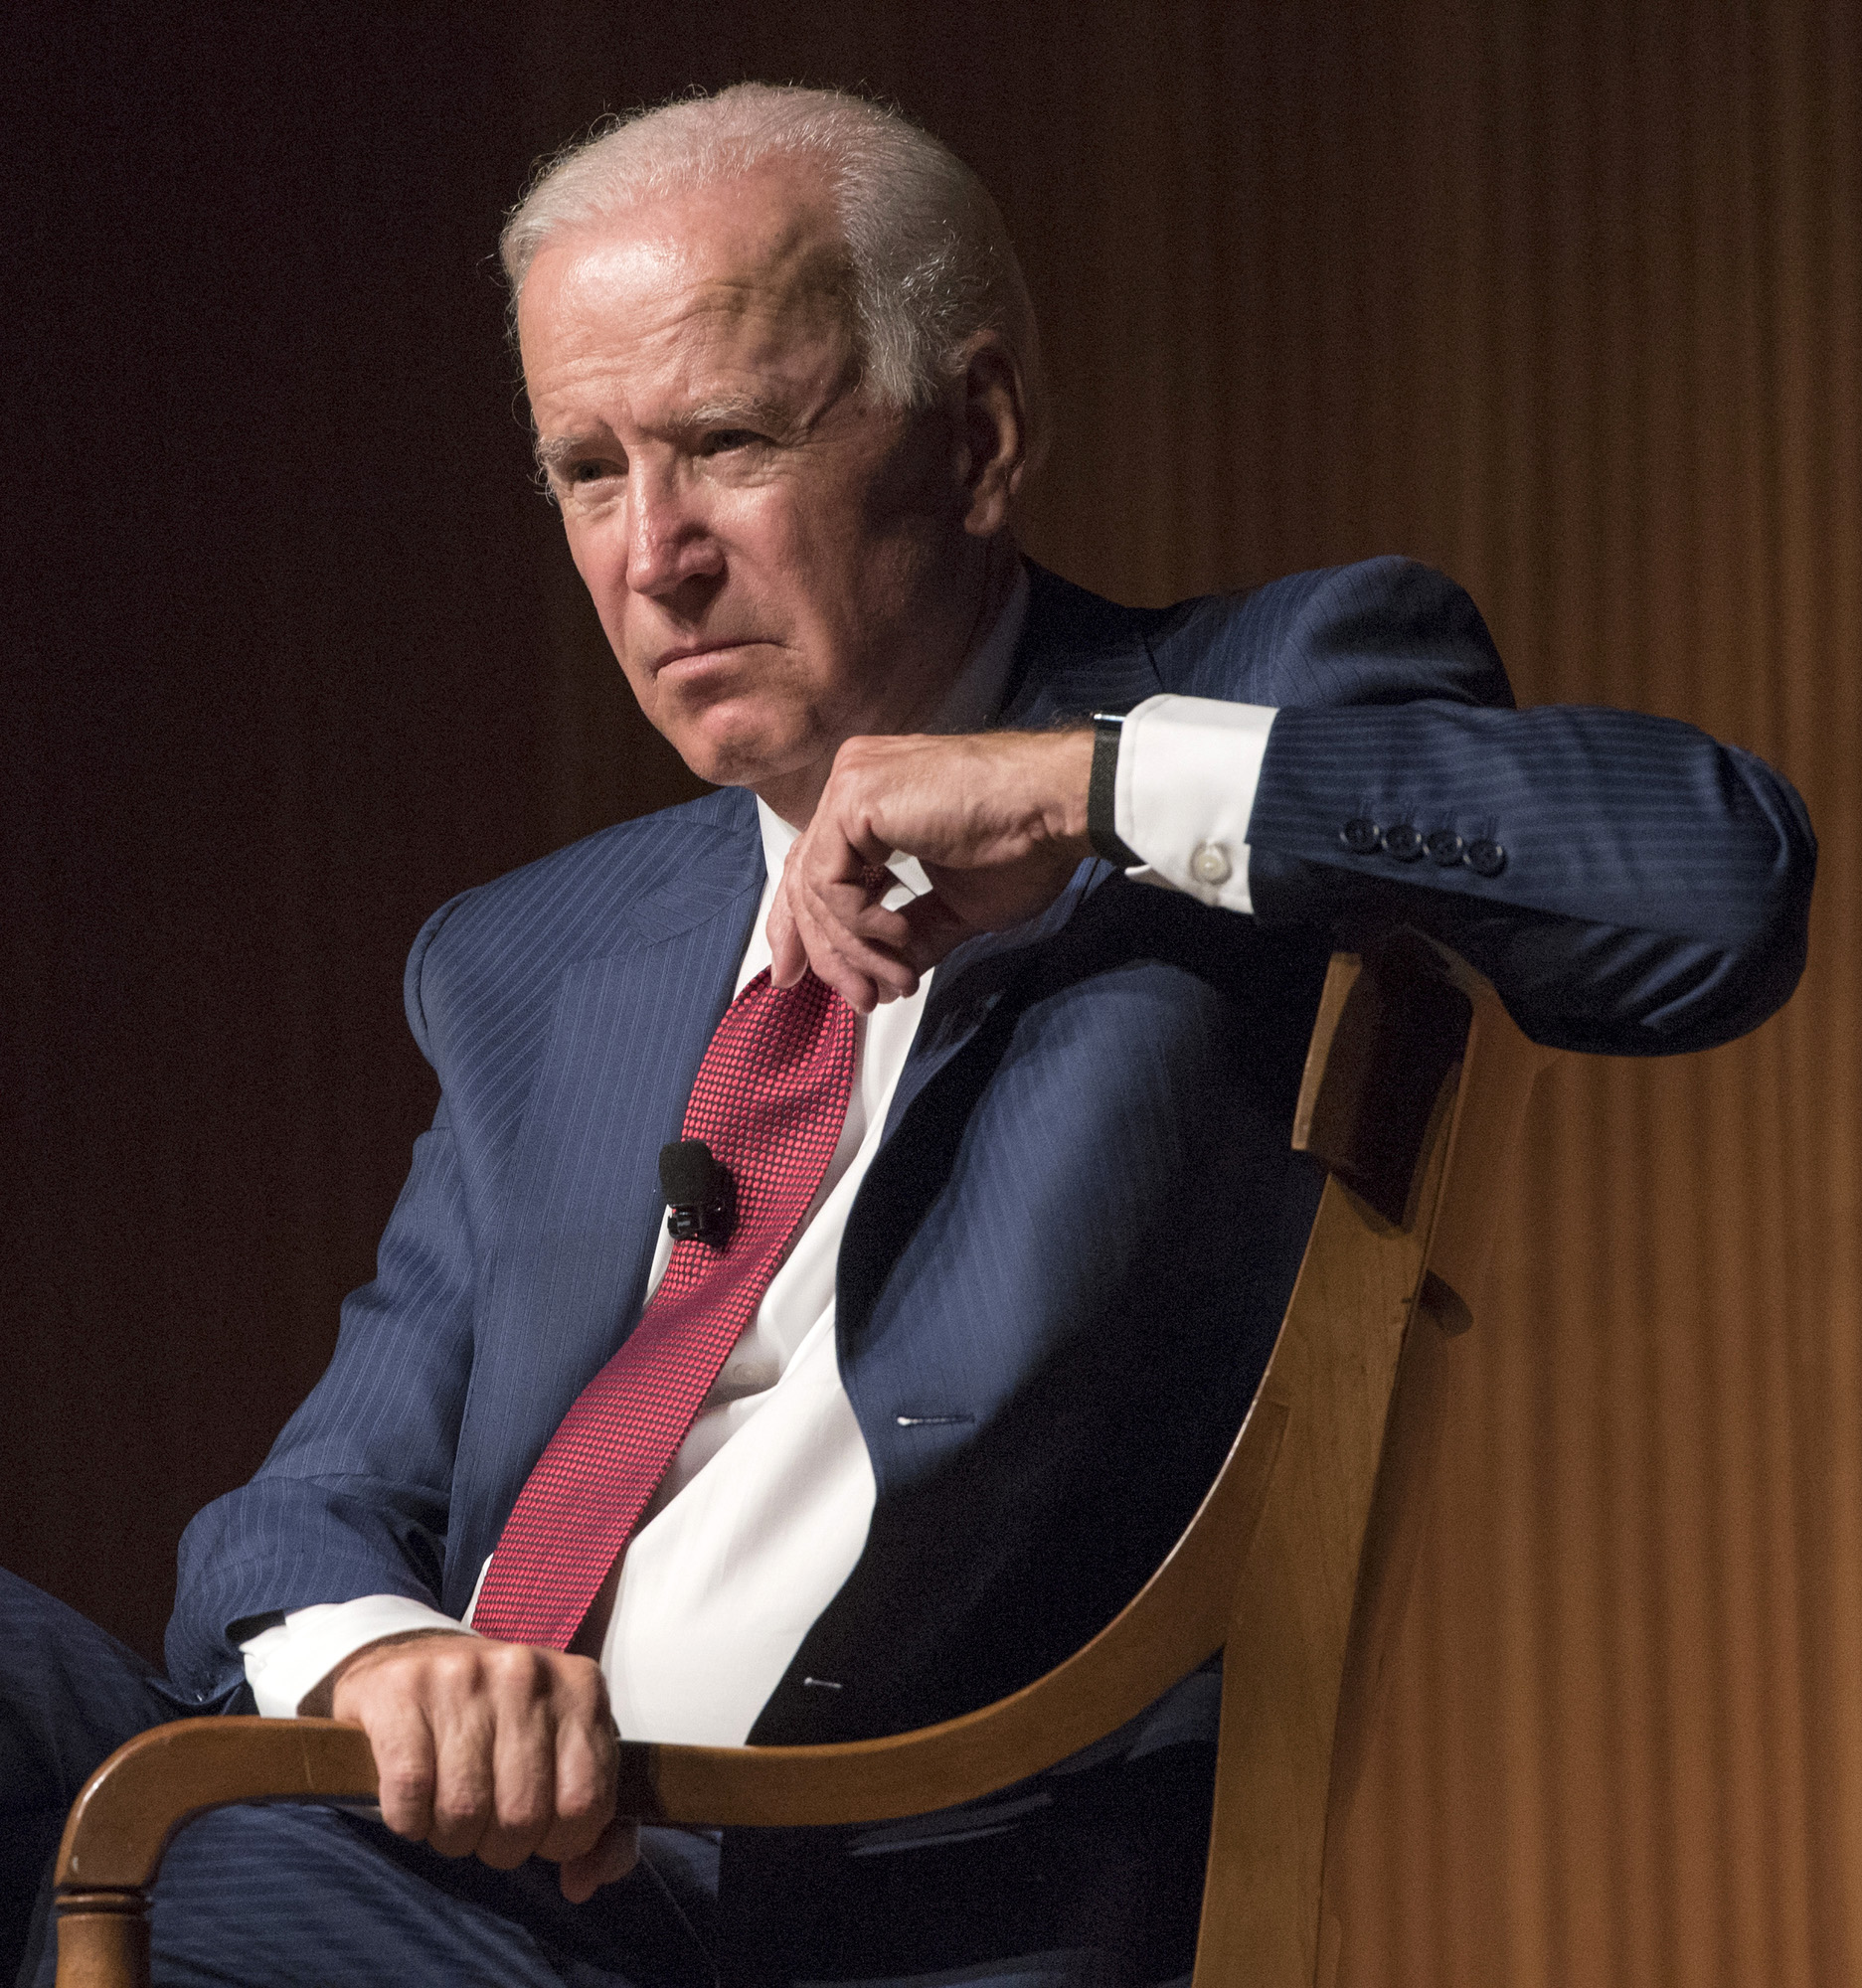 Exposed: The Lies of Biden’s Tax Policy